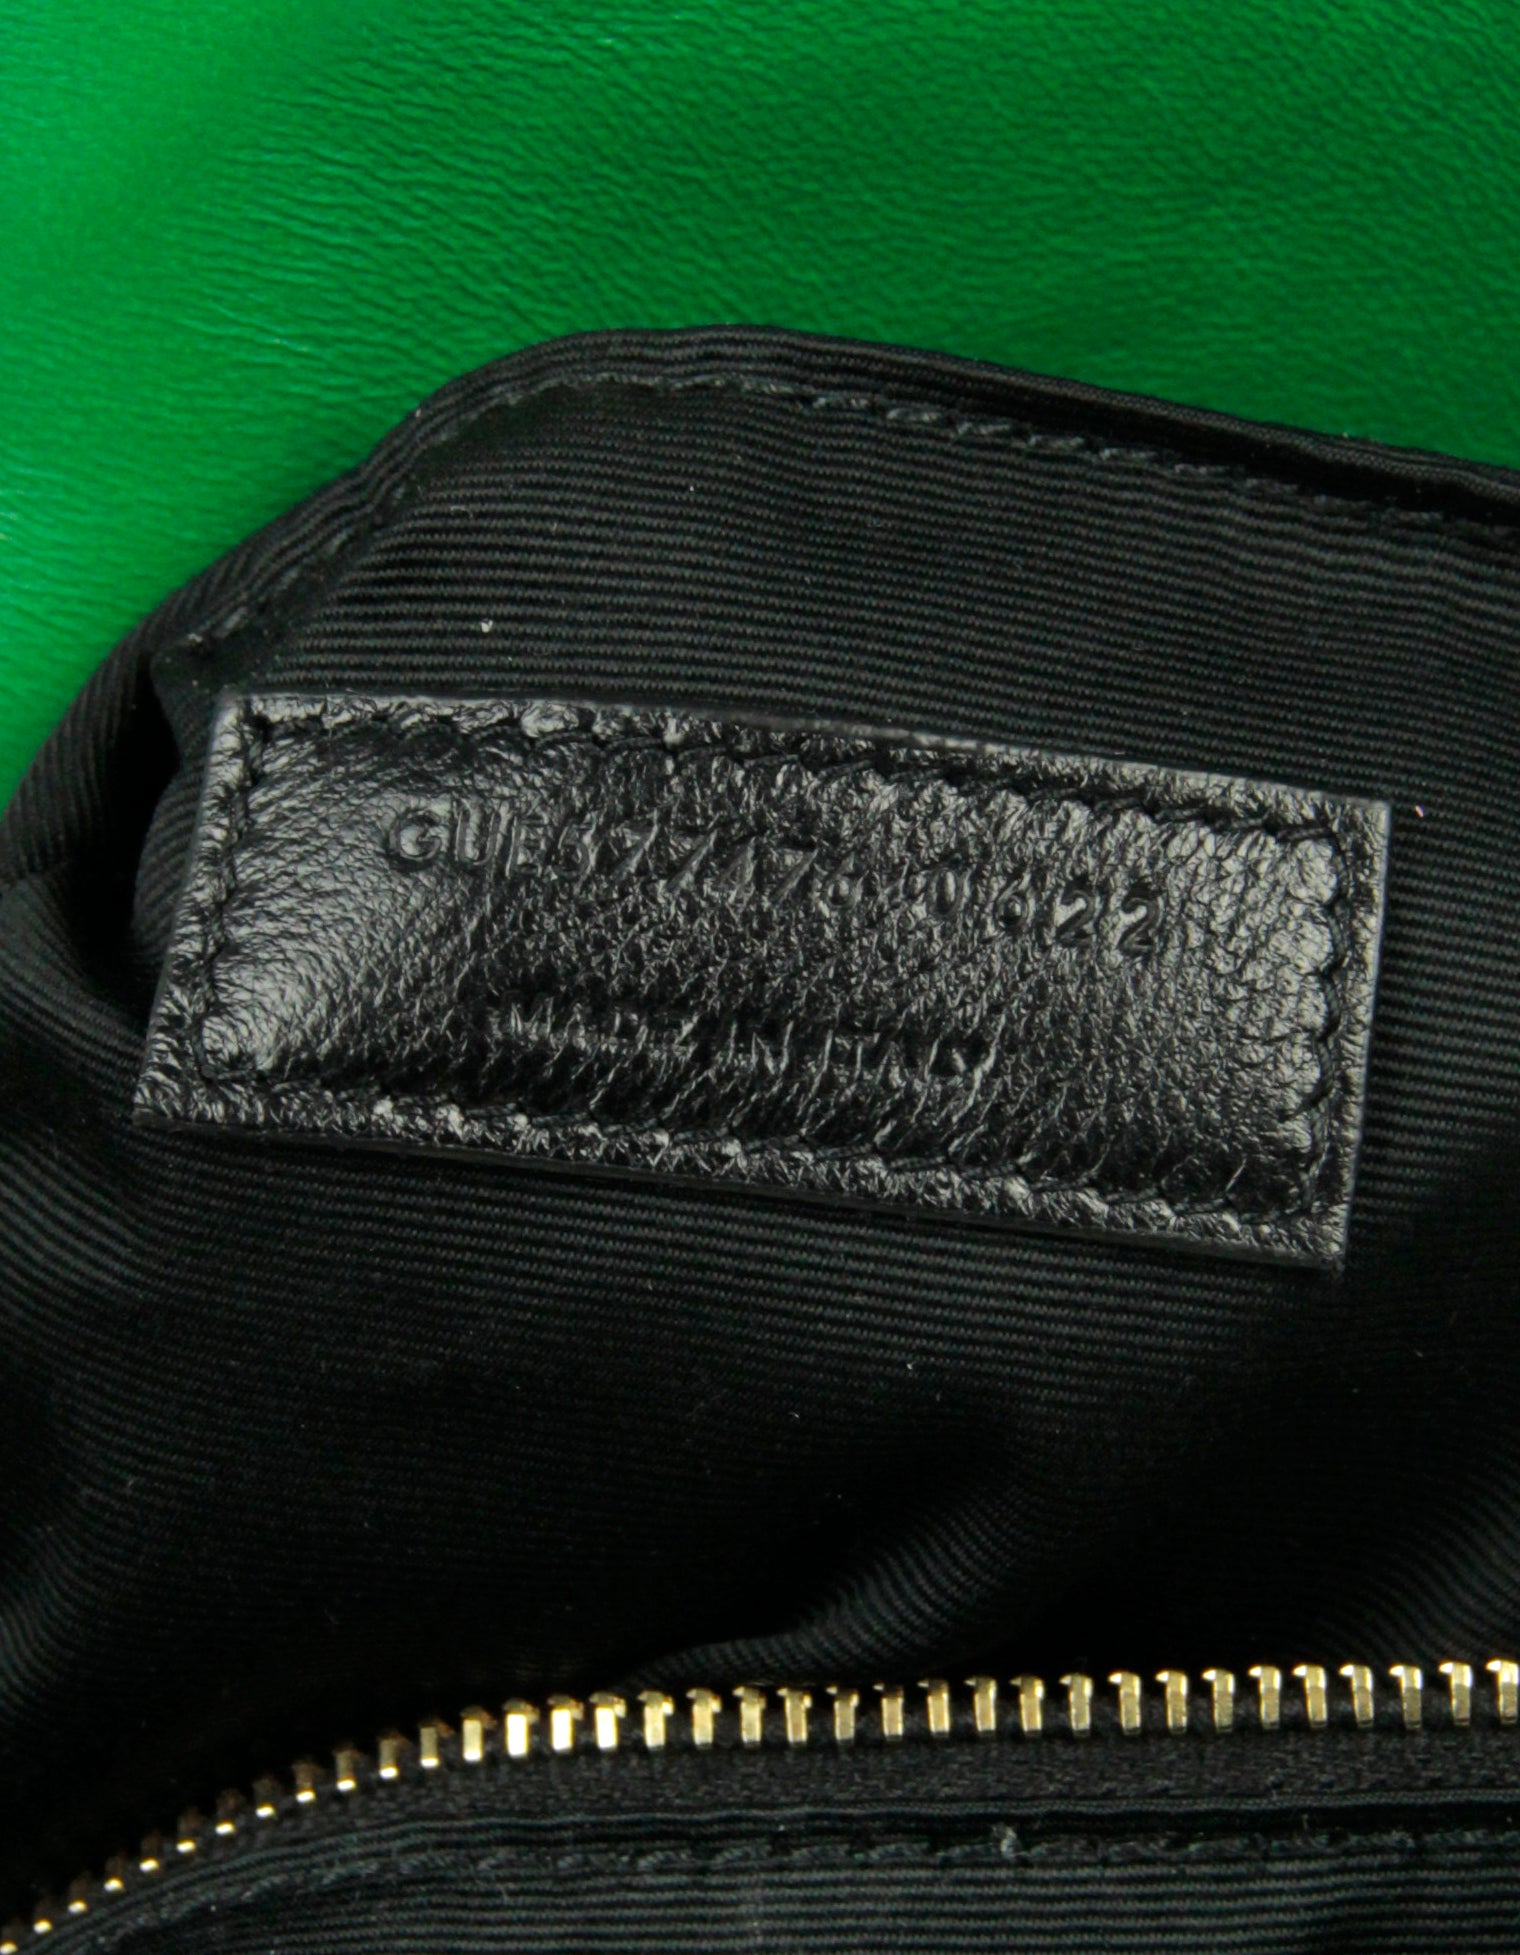 Saint Laurent Vert Praire Green Leather Small Loulou Puffer Bag